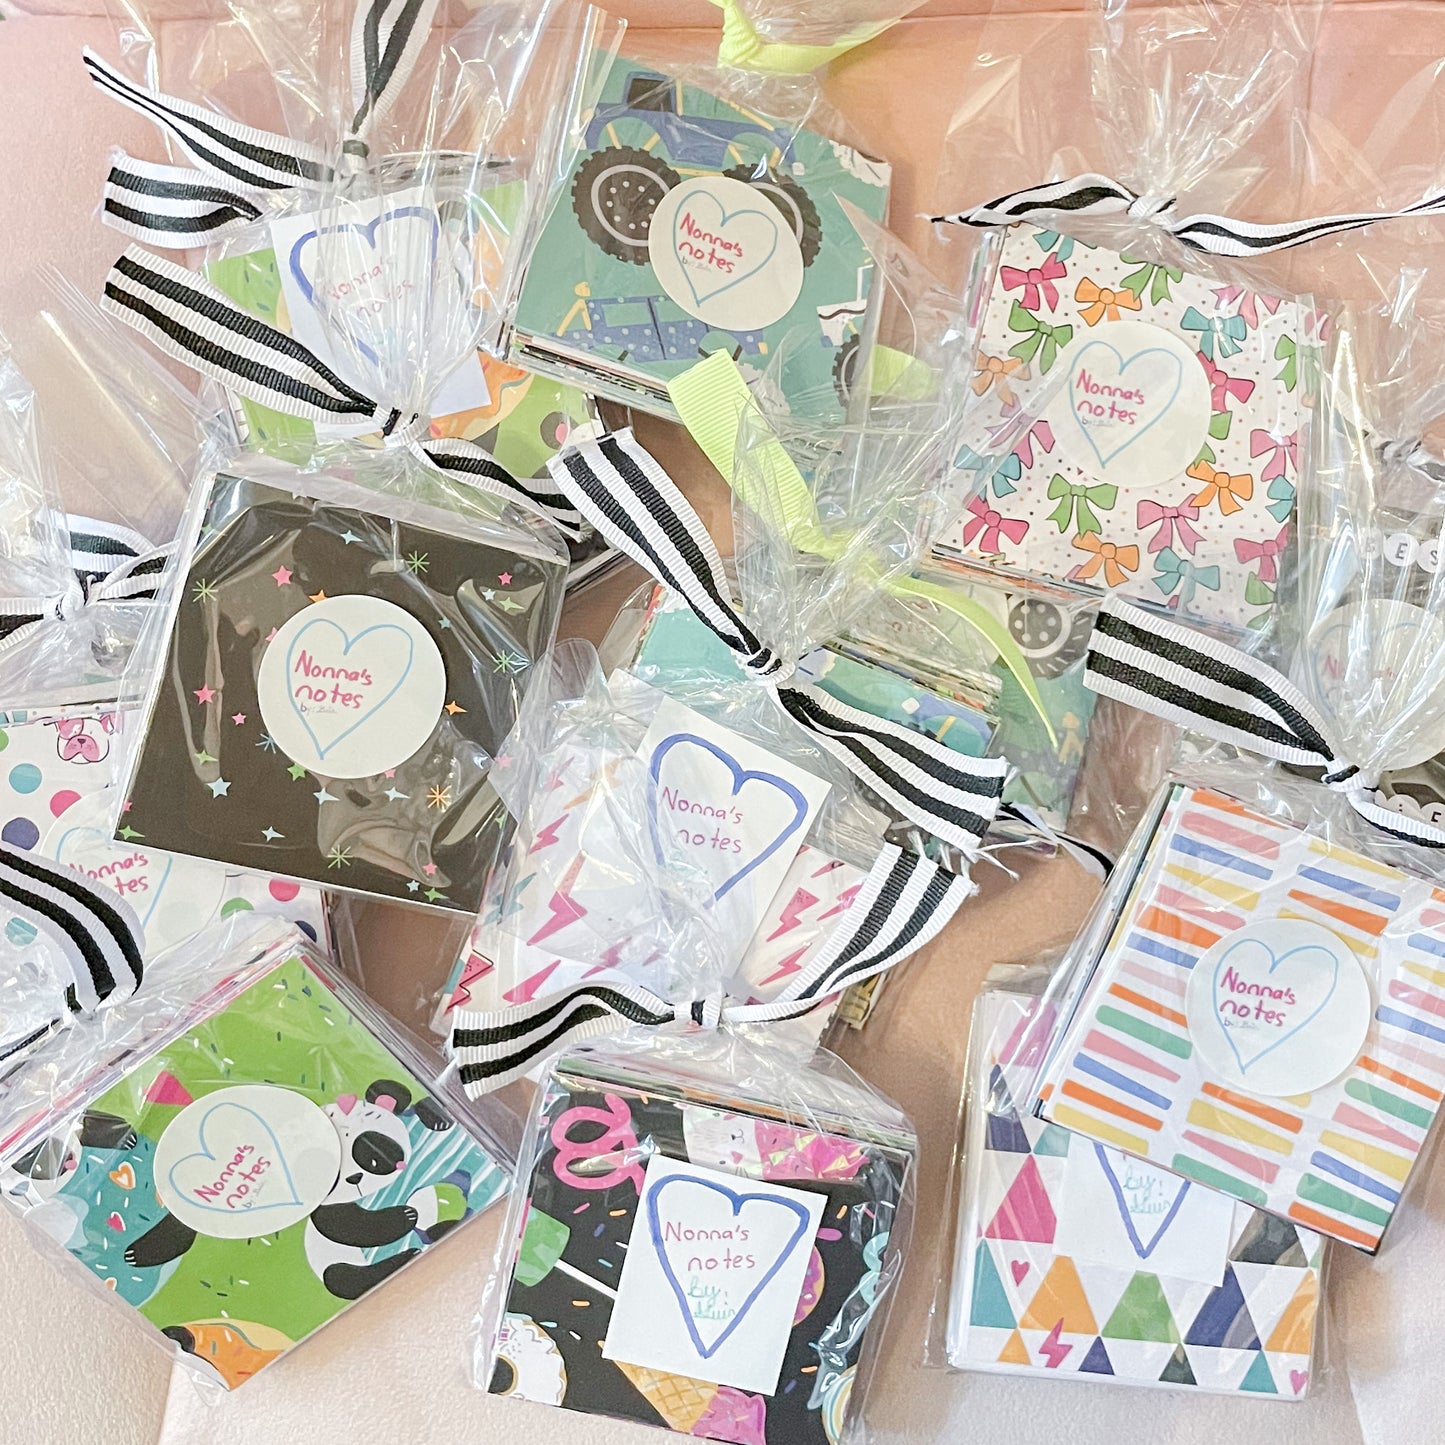 Nonna’s Notes - packs of mini notes